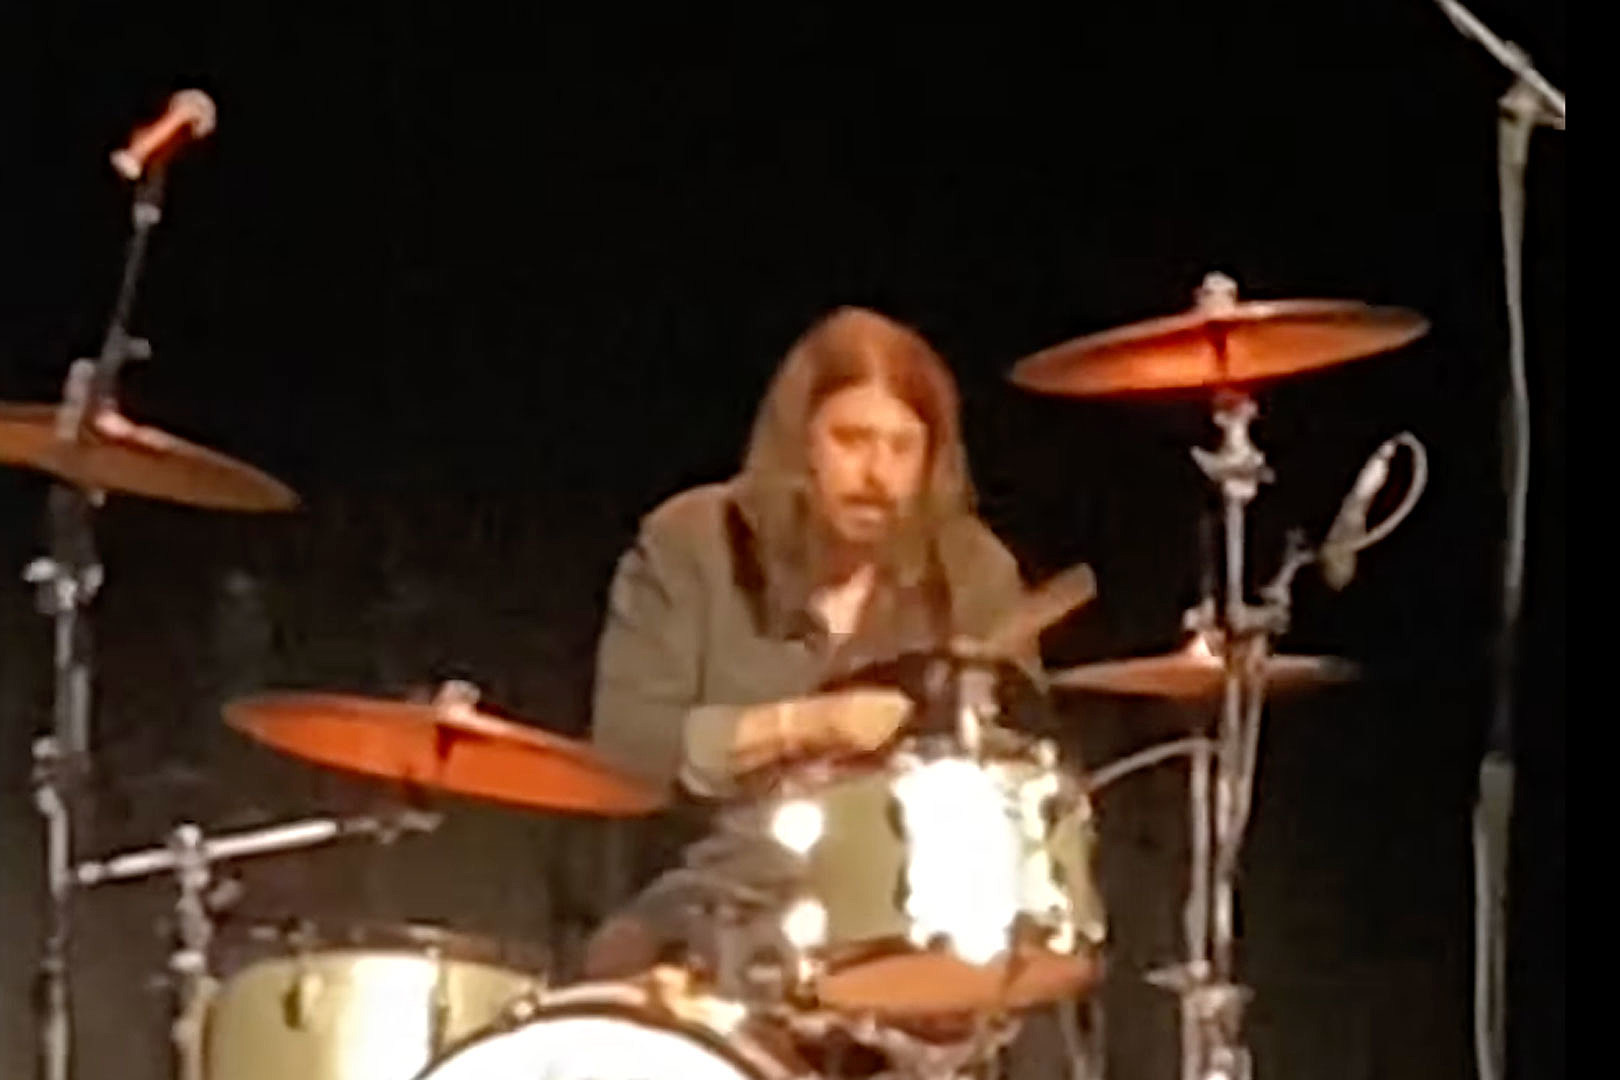 Watch Dave Grohl Drum to Nirvana's 'Smells Like Teen Spirit'